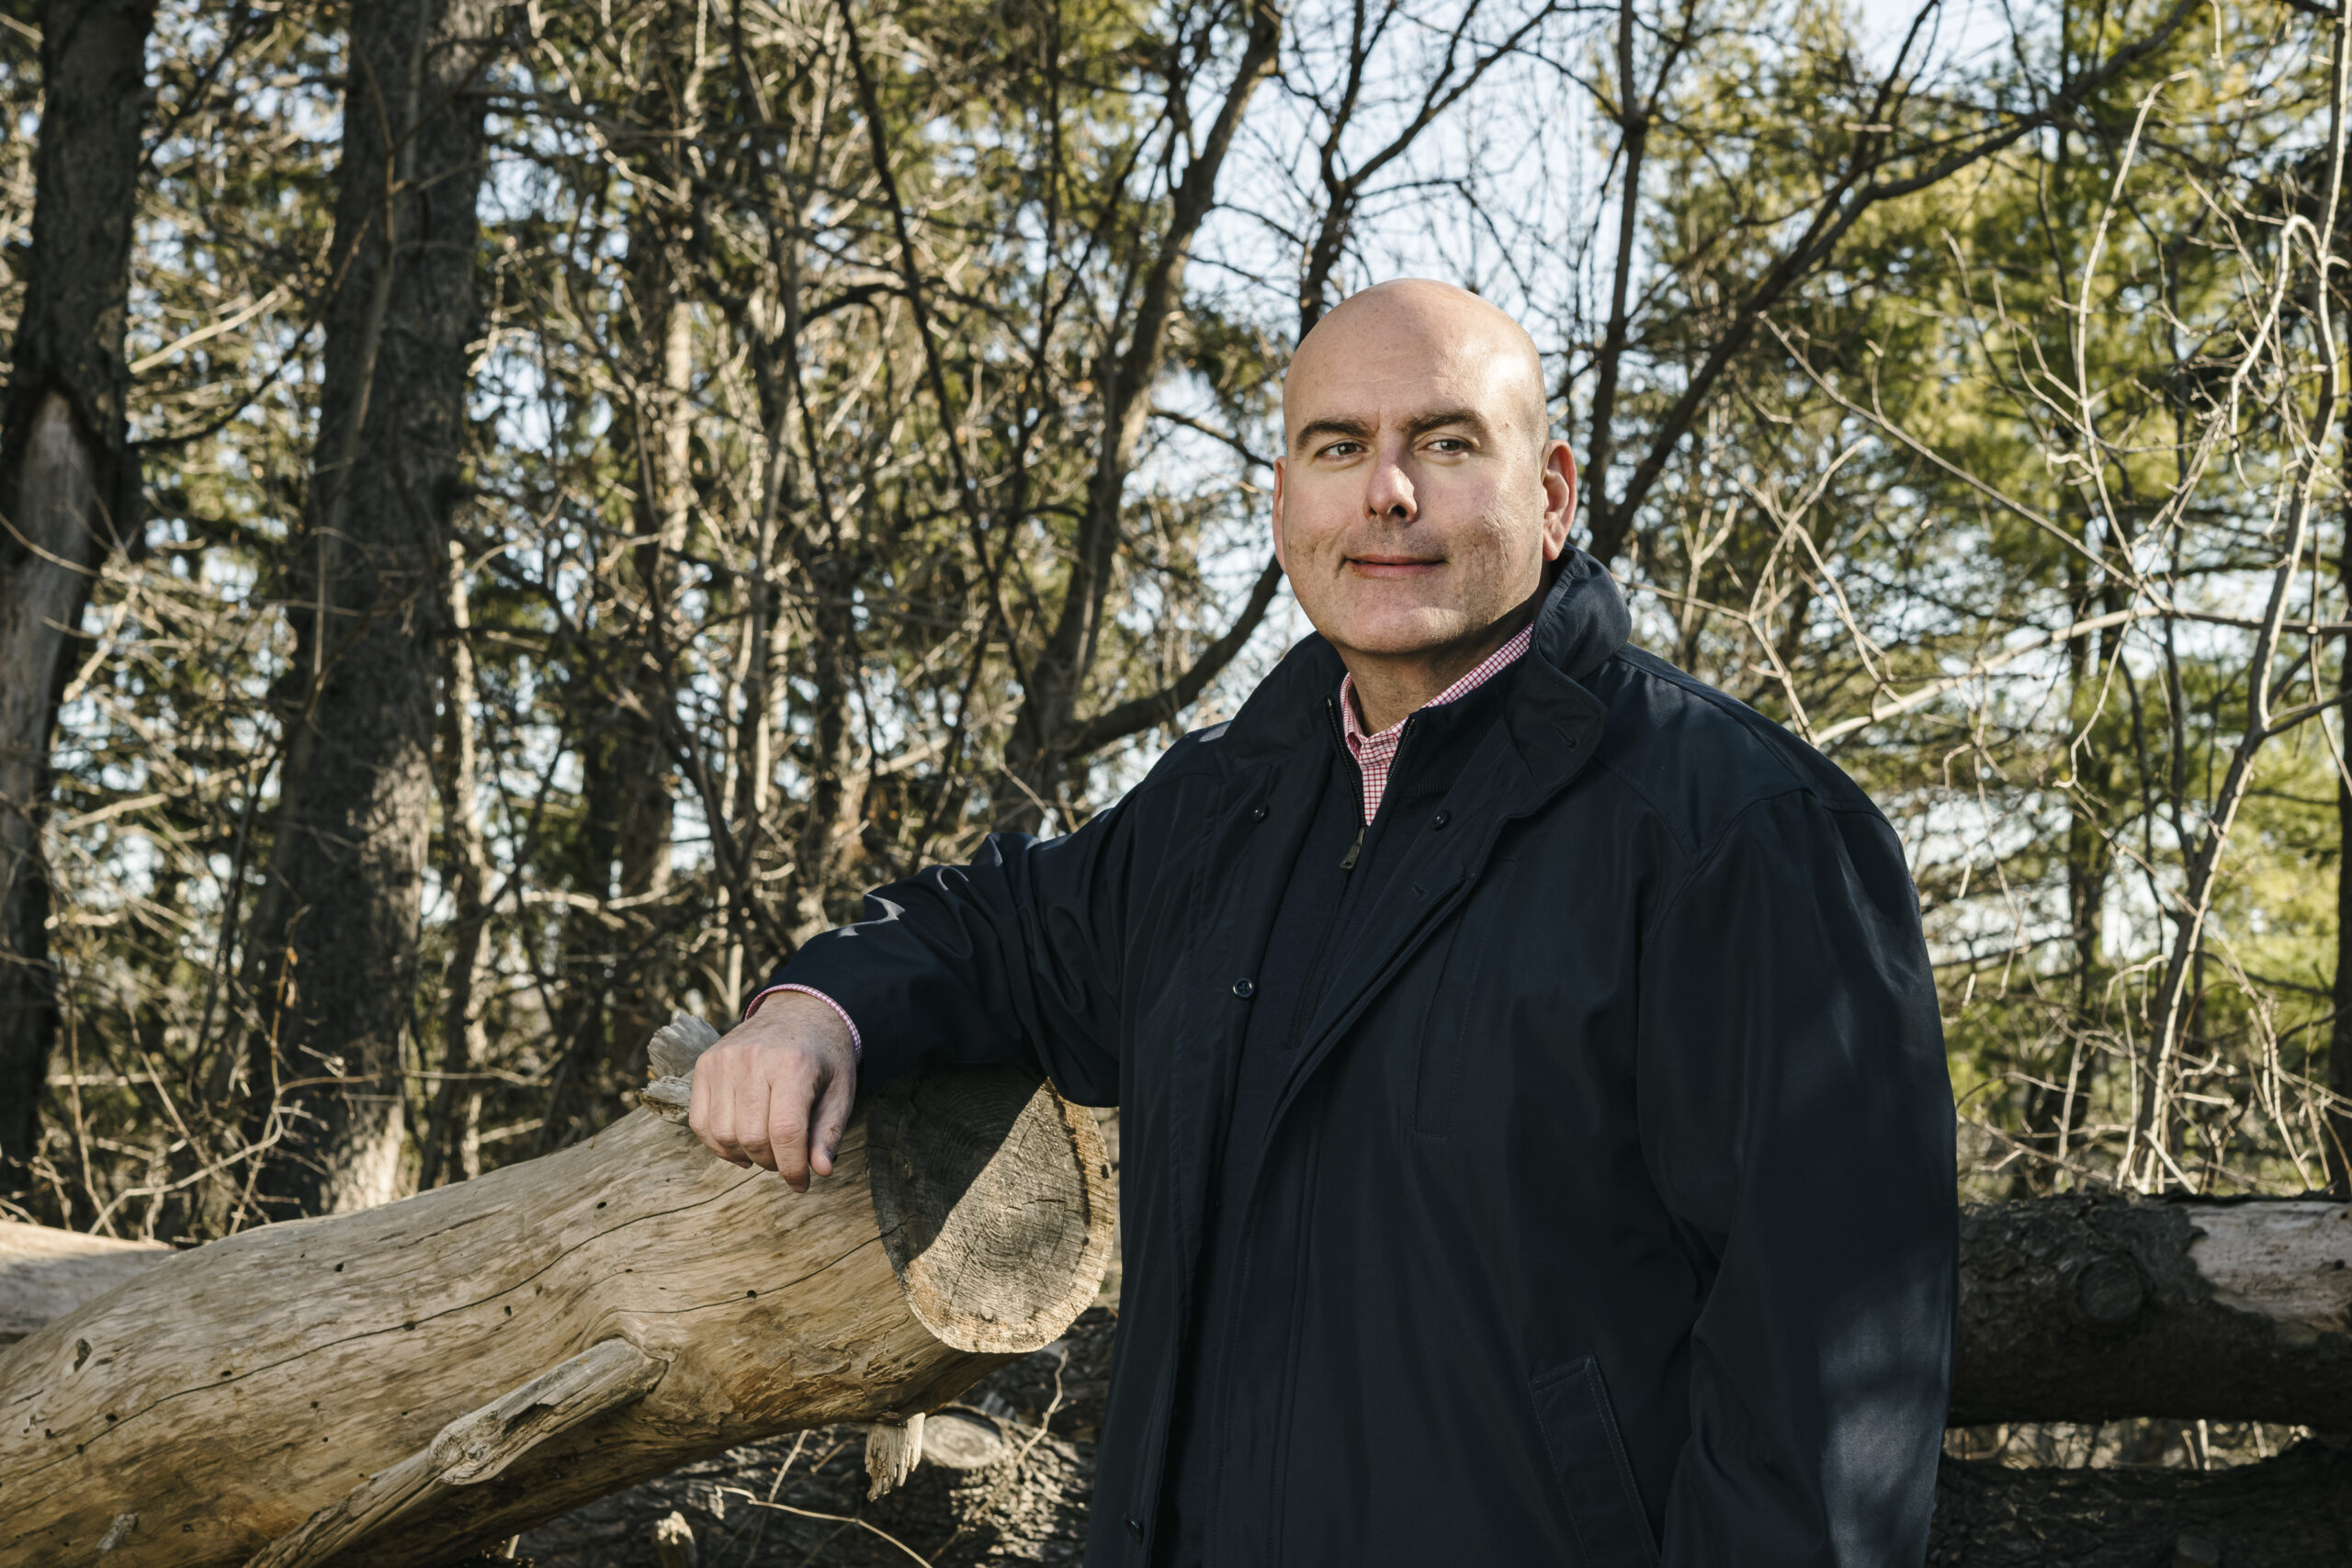 Ontario Liberal leader Steven Del Duca leans on a log in a bright forest with a slight smile, weeks before the launch of the 2022 Ontario election campaign.